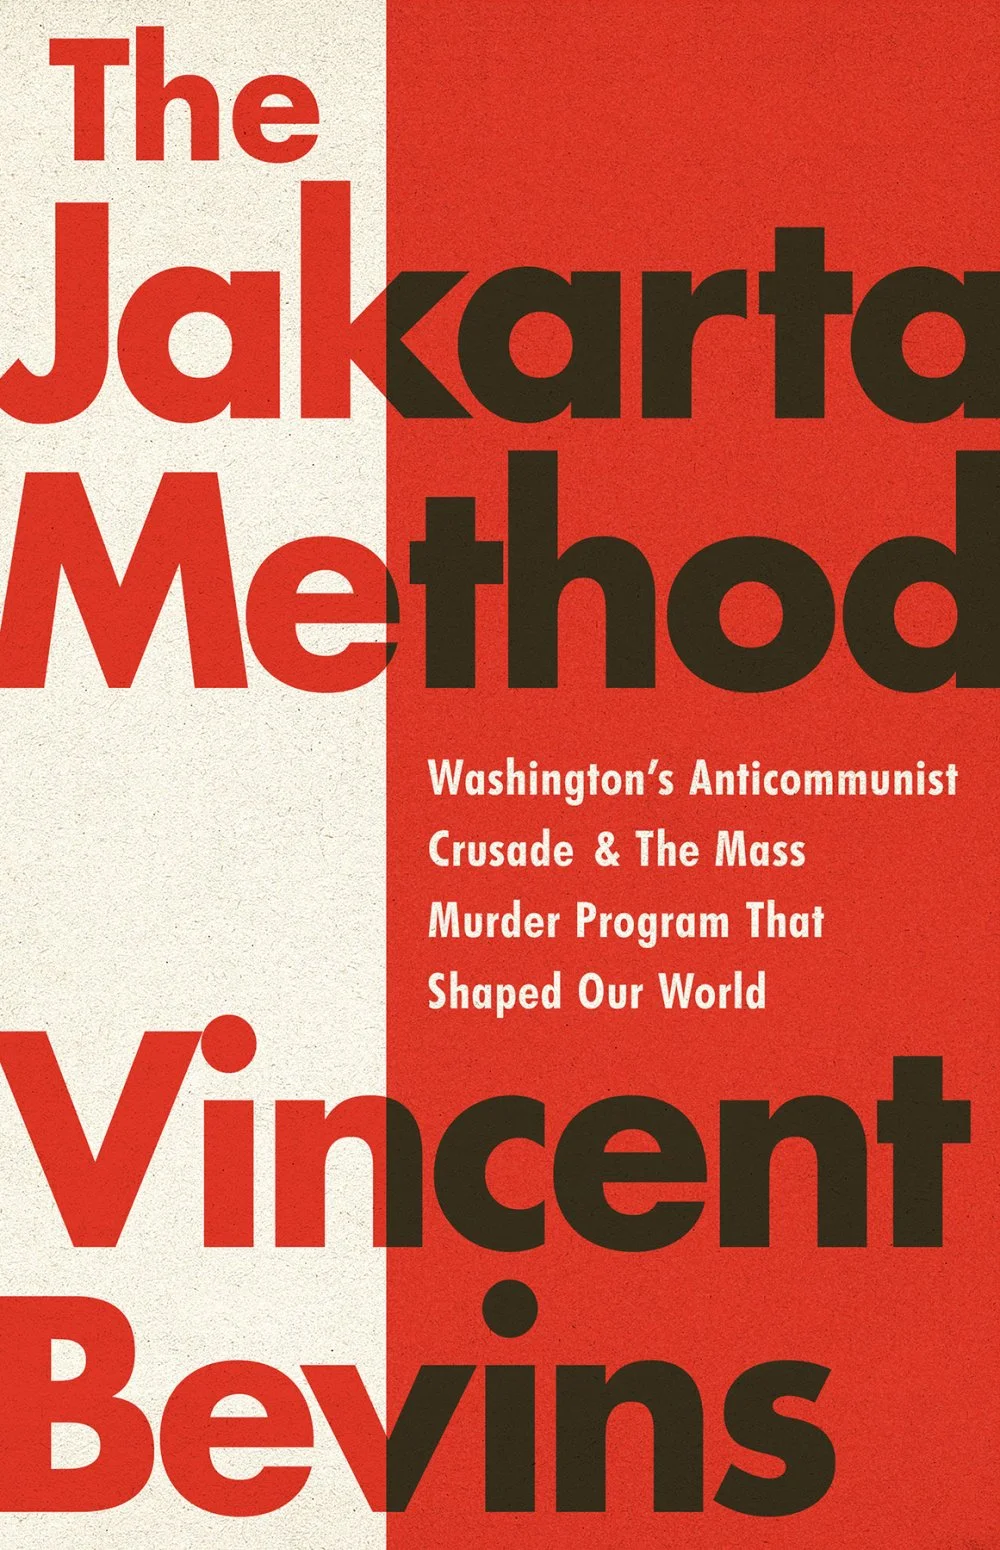 Cover of the English-language edition of "The Jakarta Method"